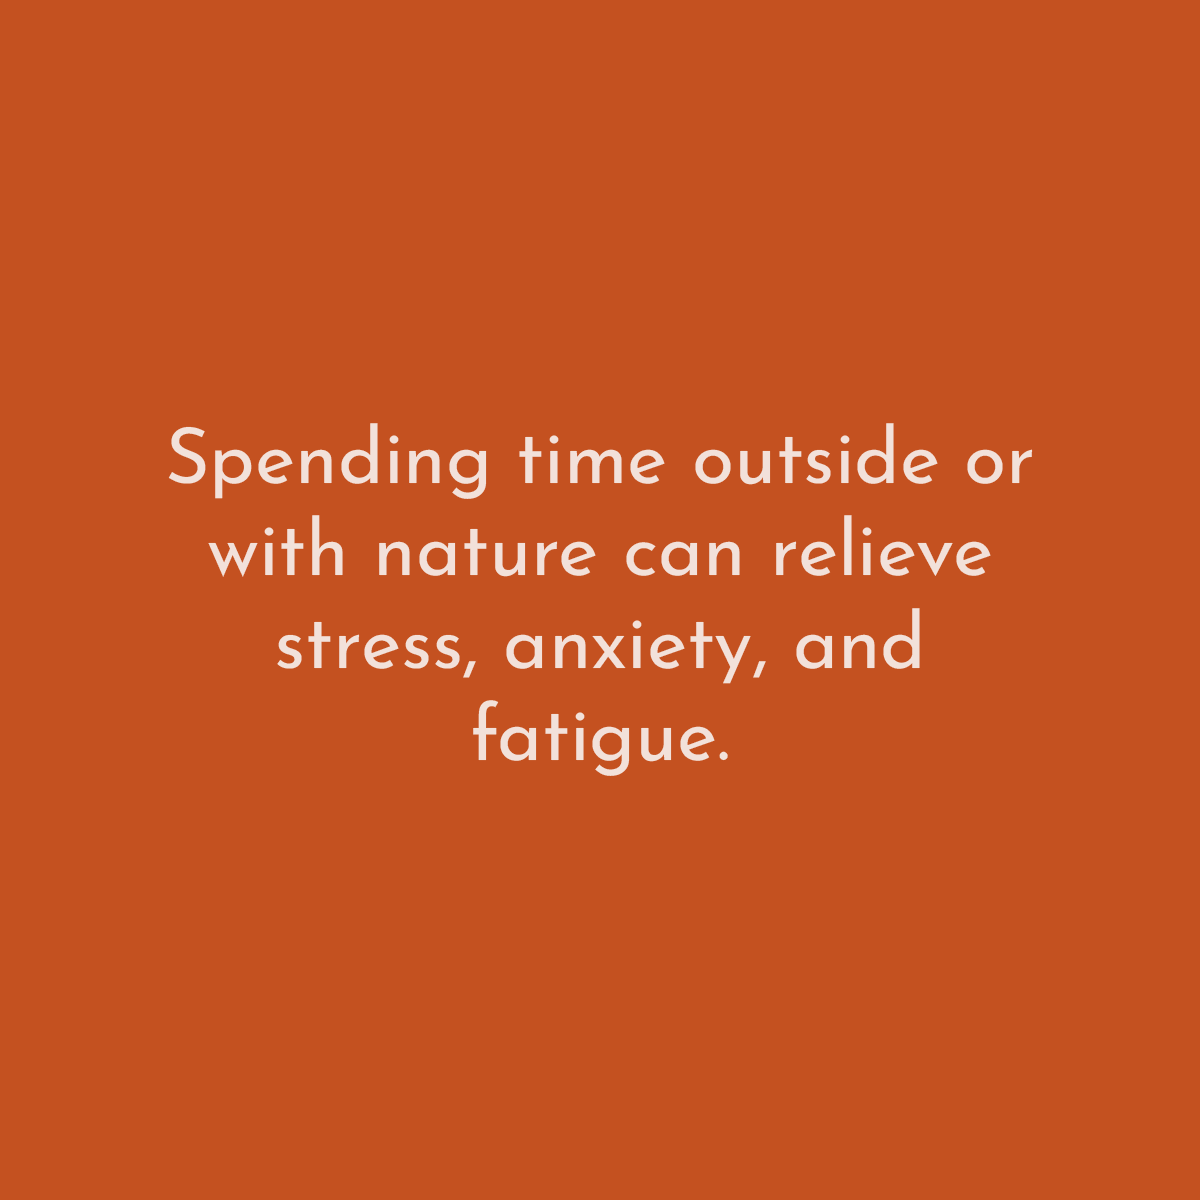 Spending time outside or with nature can relieve stress, anxiety, and fatigue.